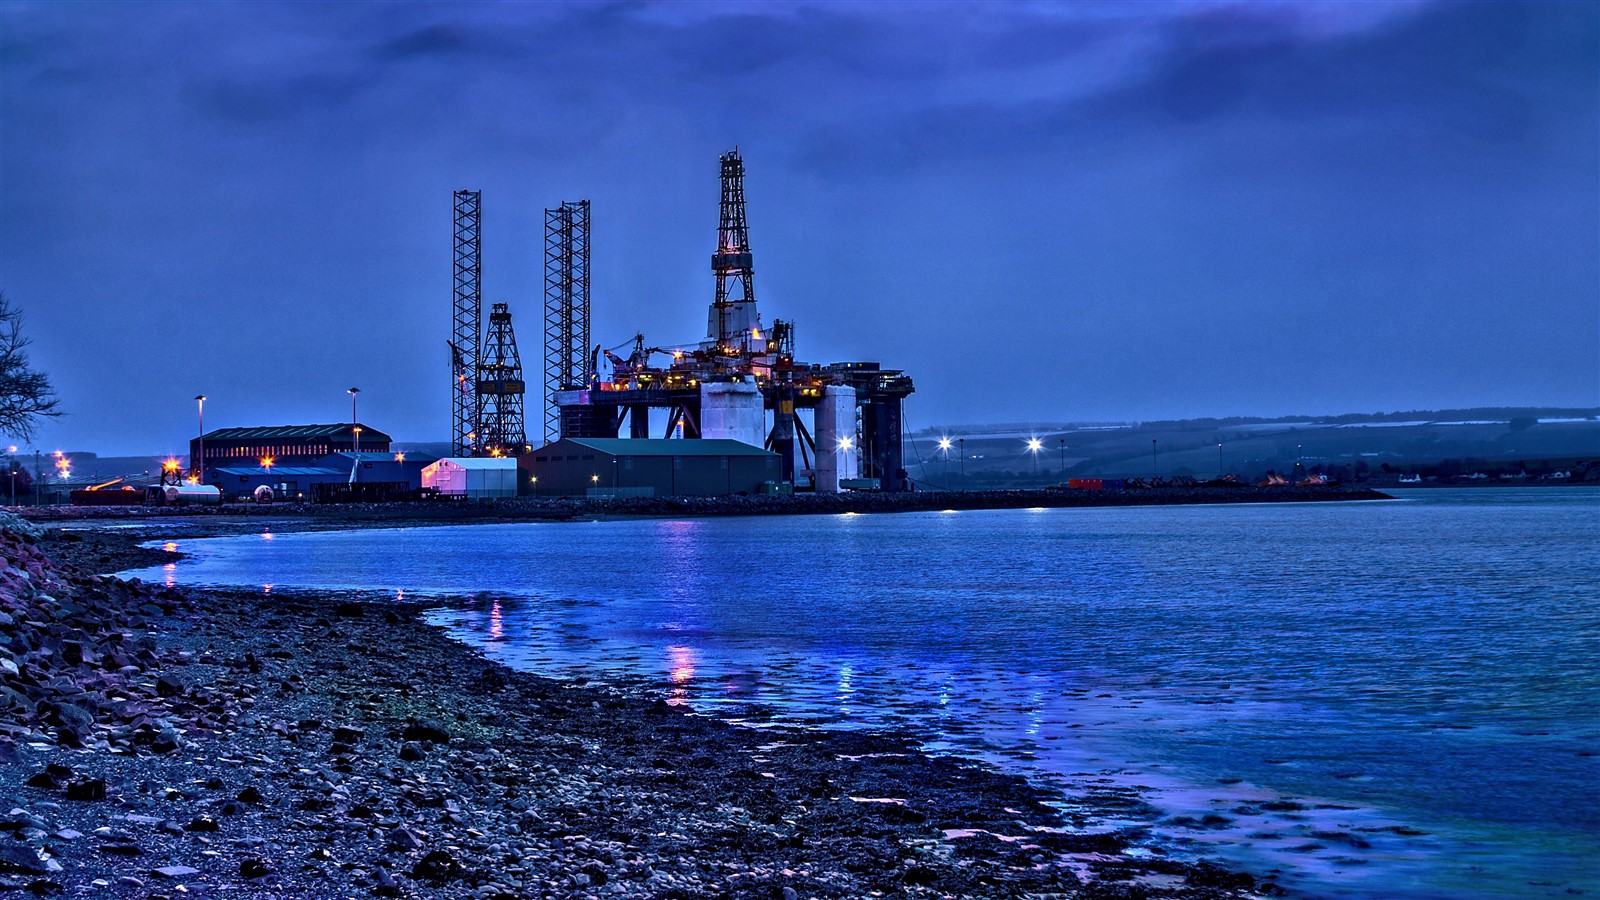 Oil Rig HD Wallpaper Pictures To Pin